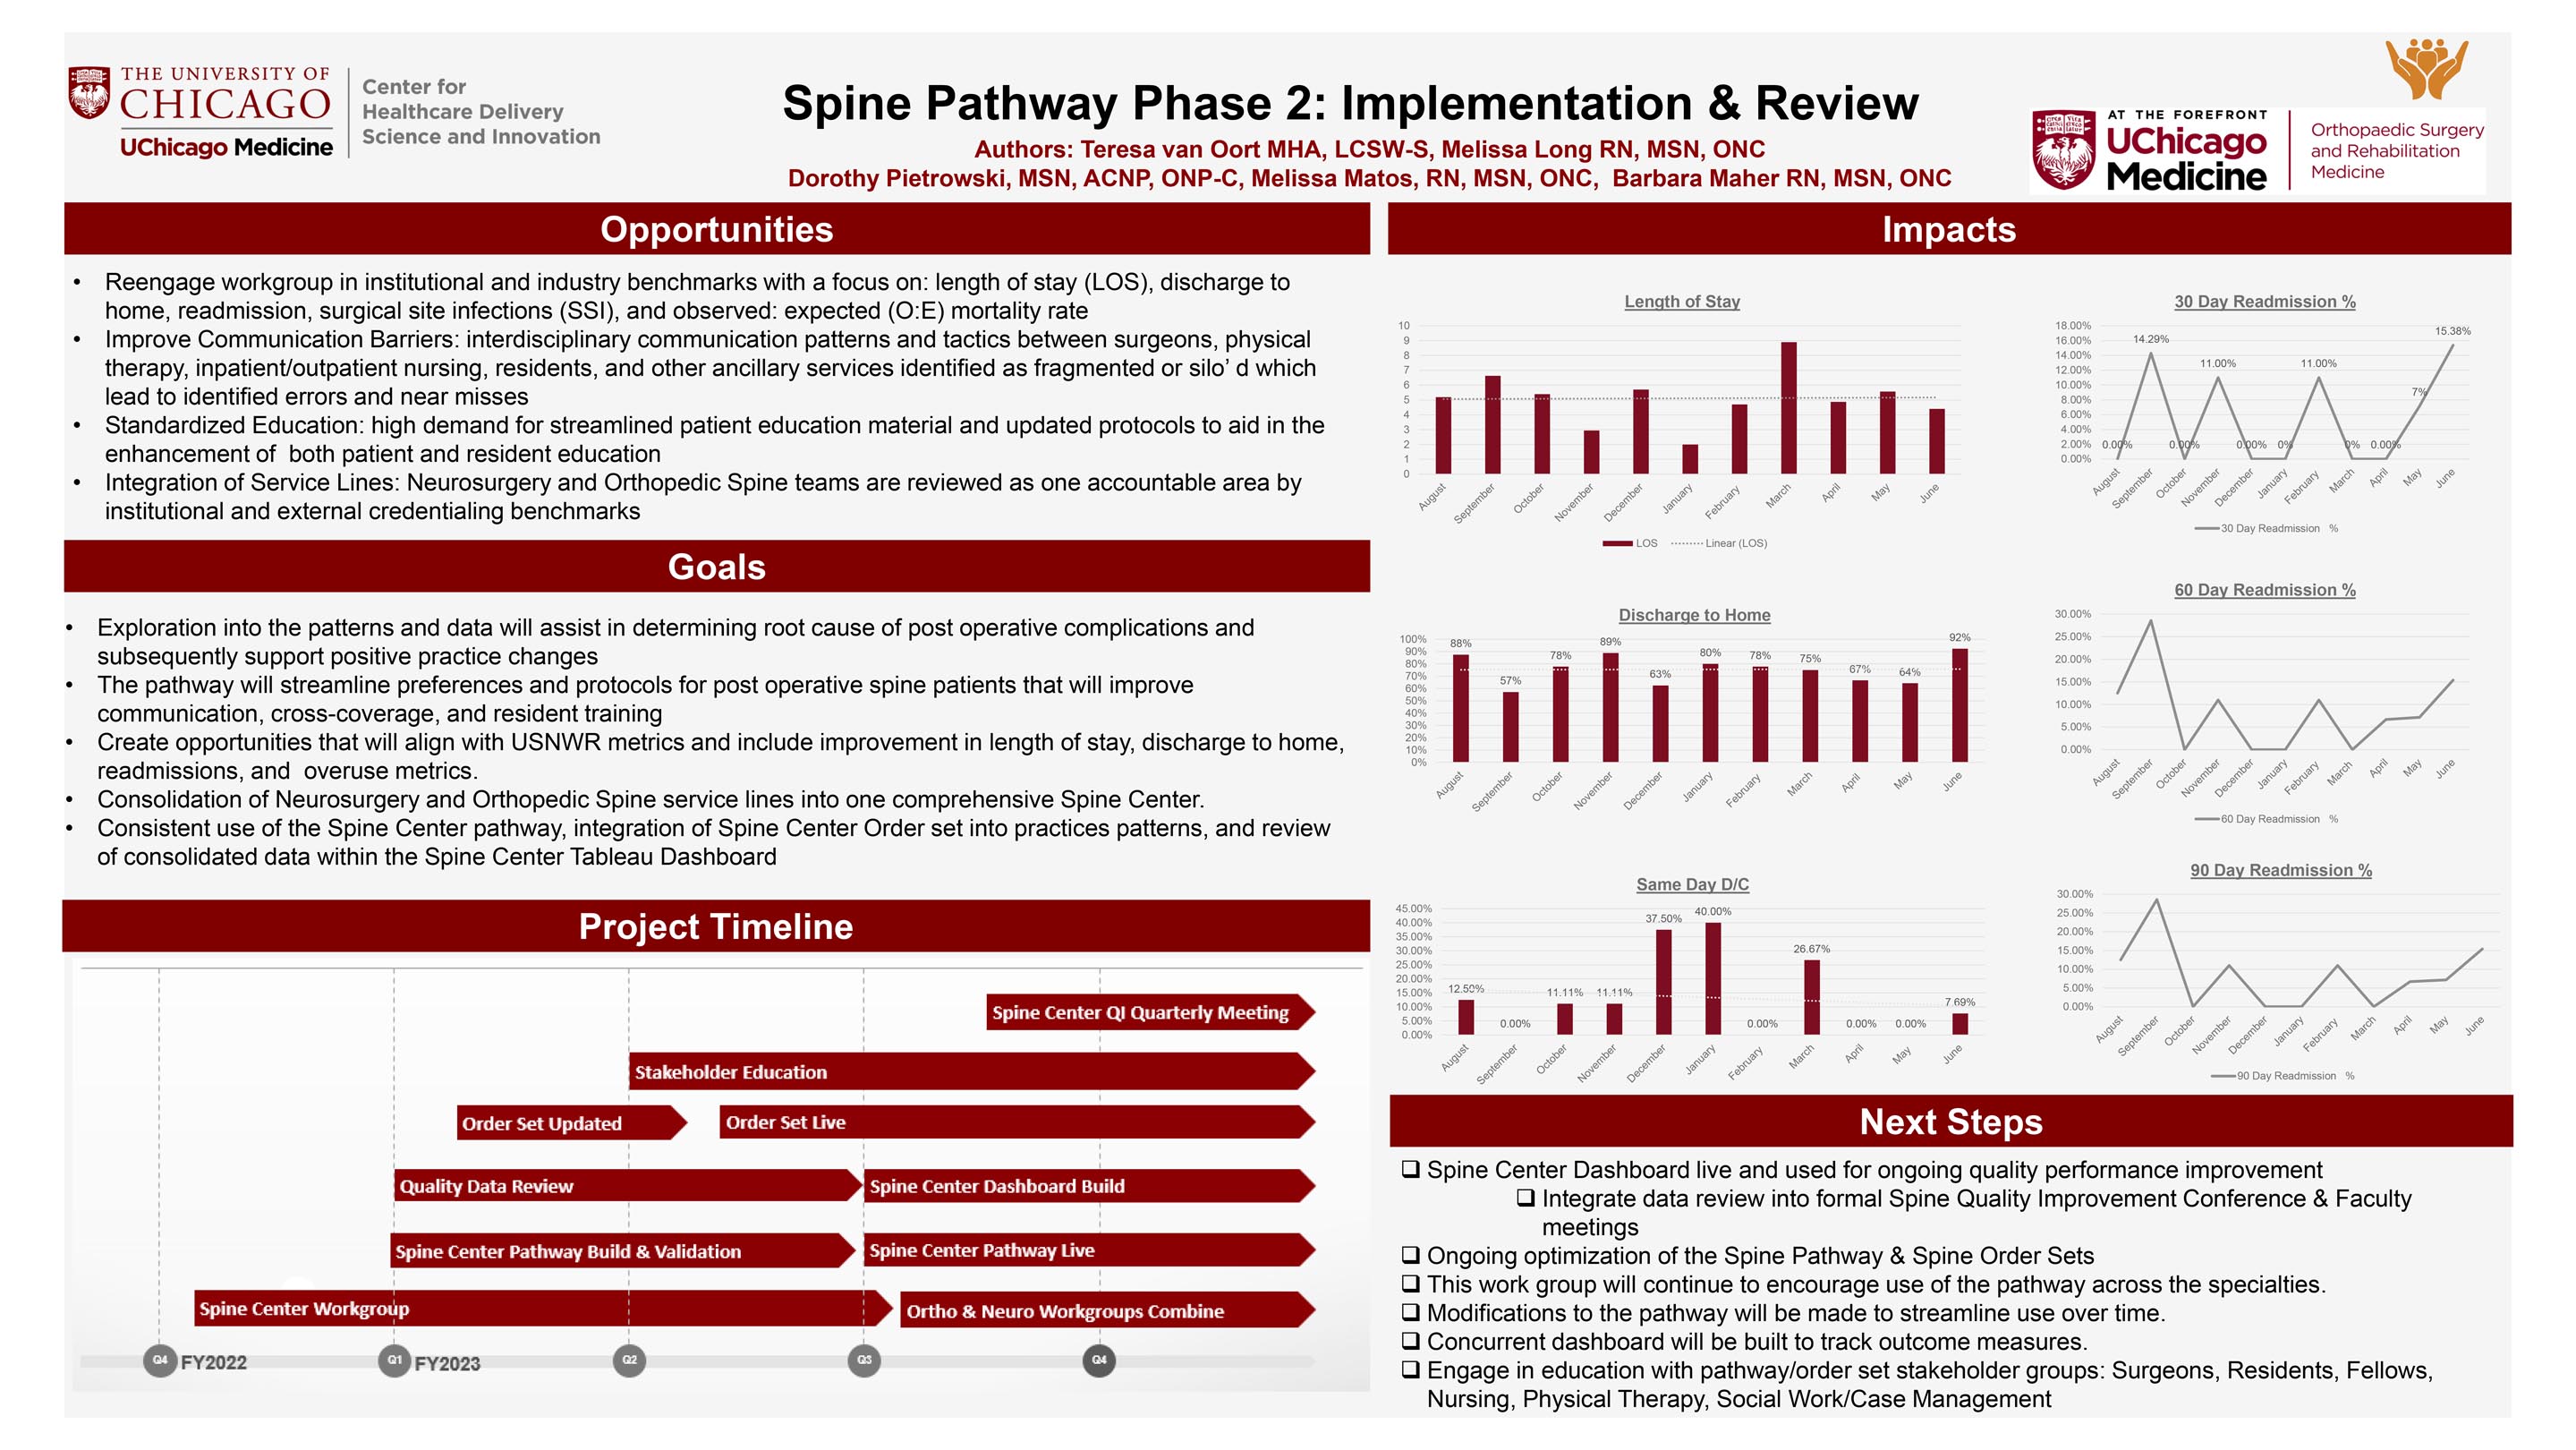 VANOORT_Spine Pathway Phase 2 Implementation and Review